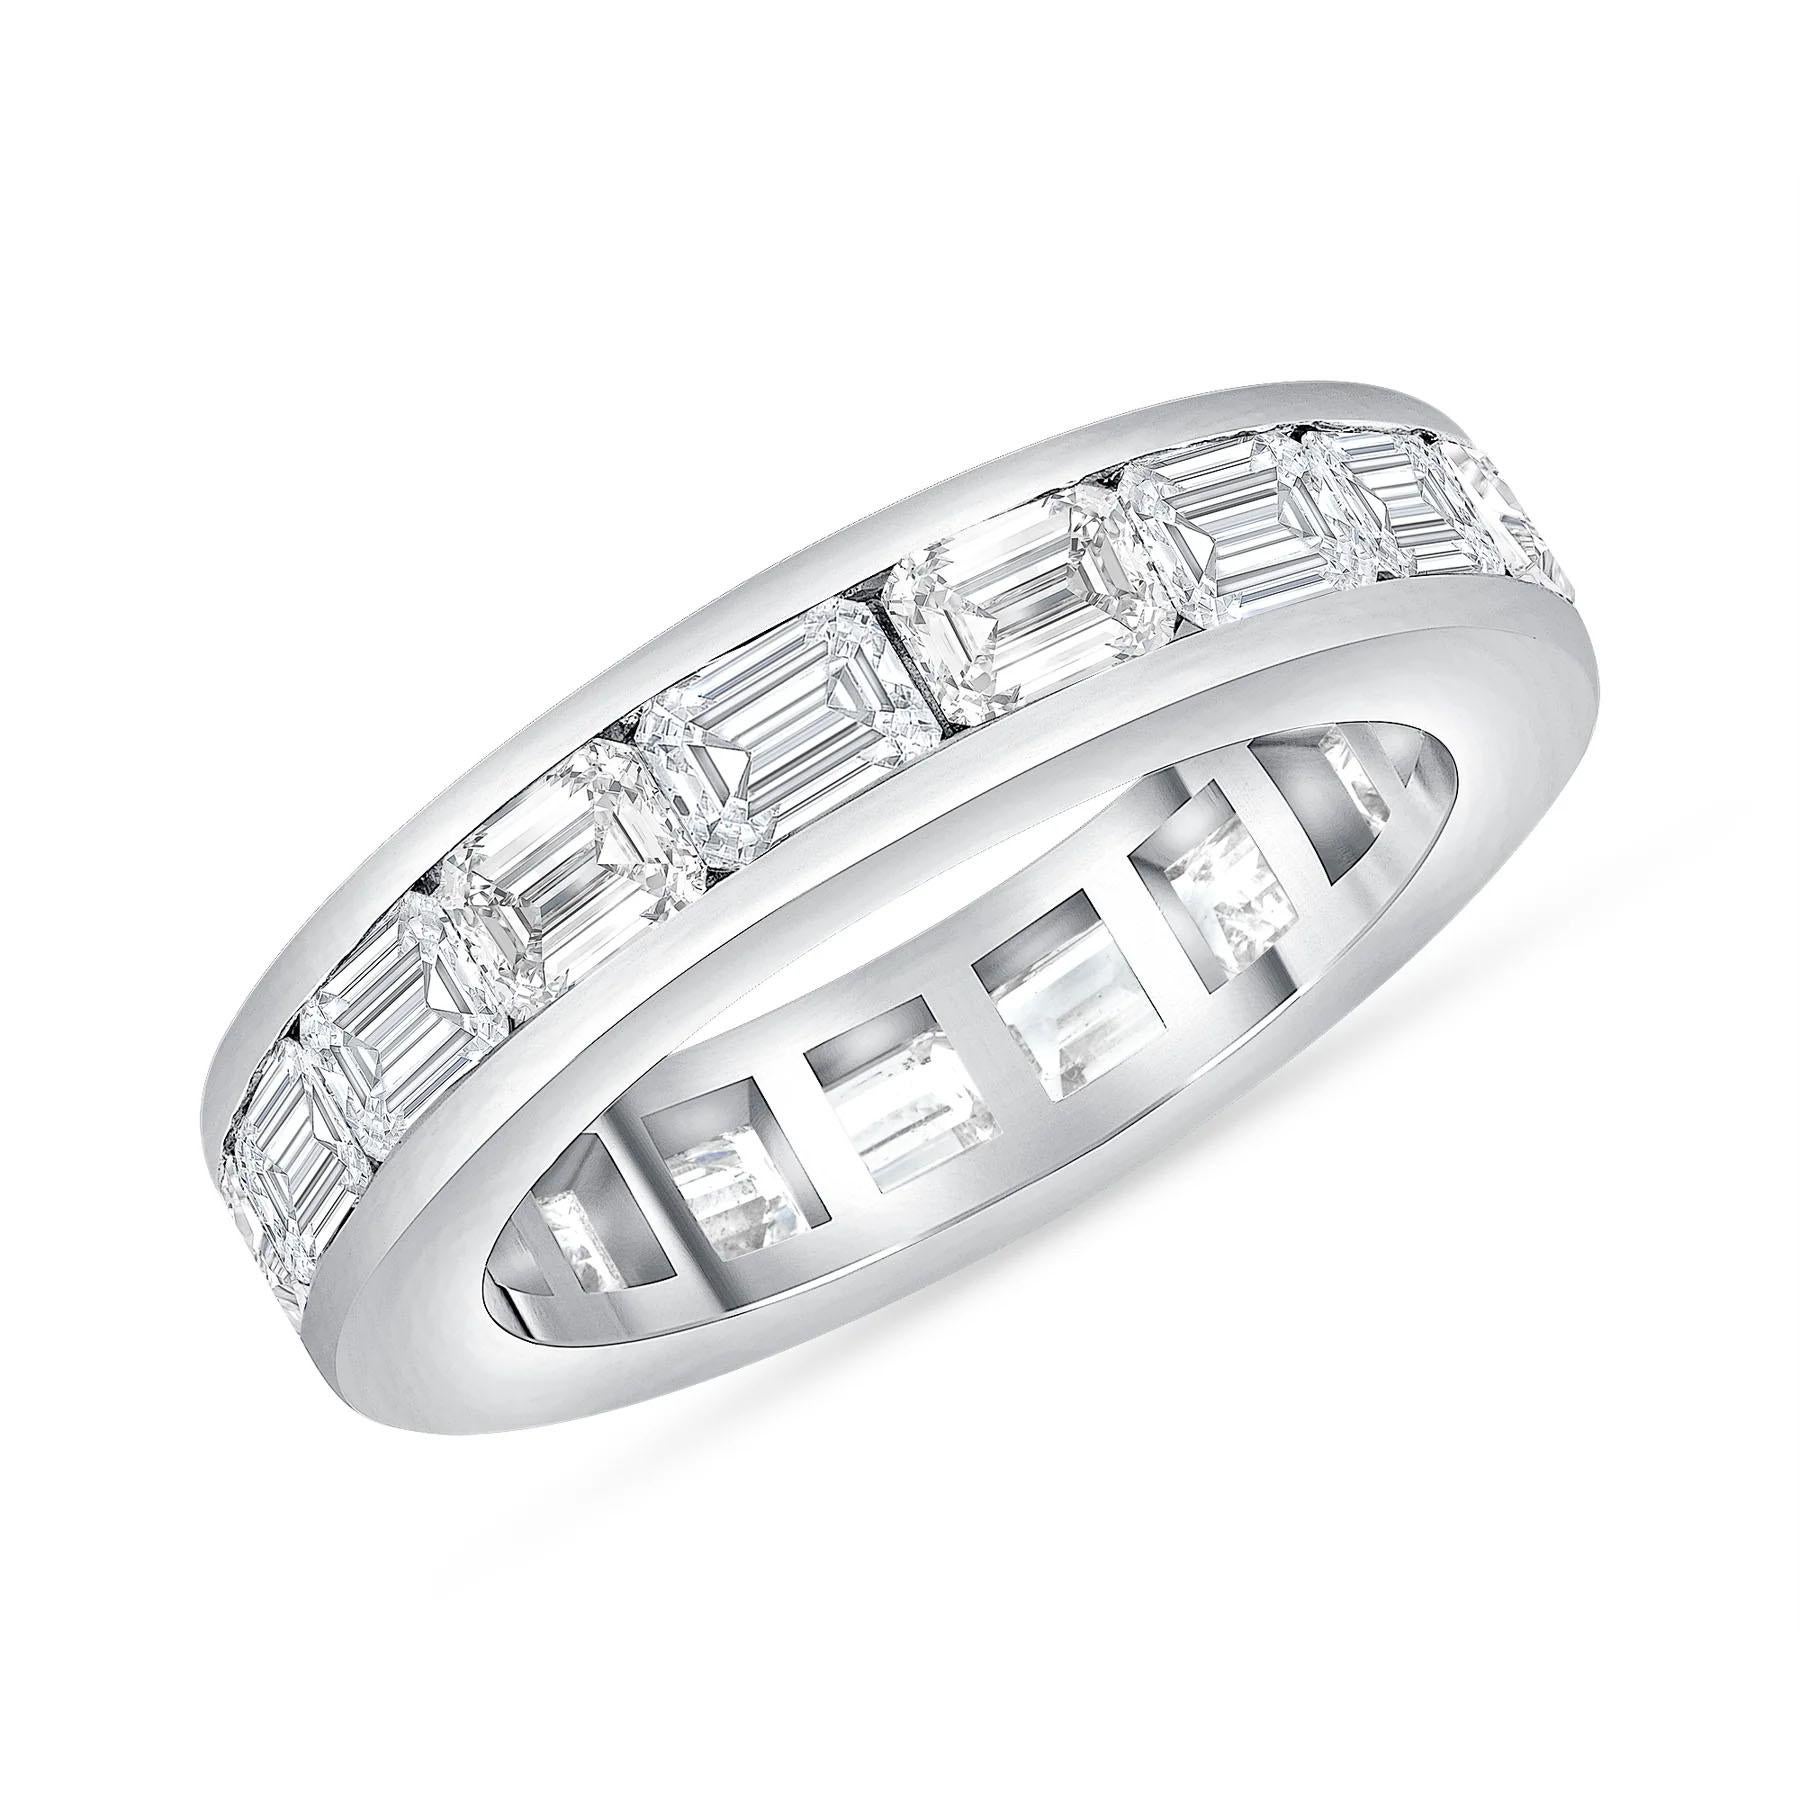 For Sale:  Makenzie's Eternity Band - East West Channel Set 3